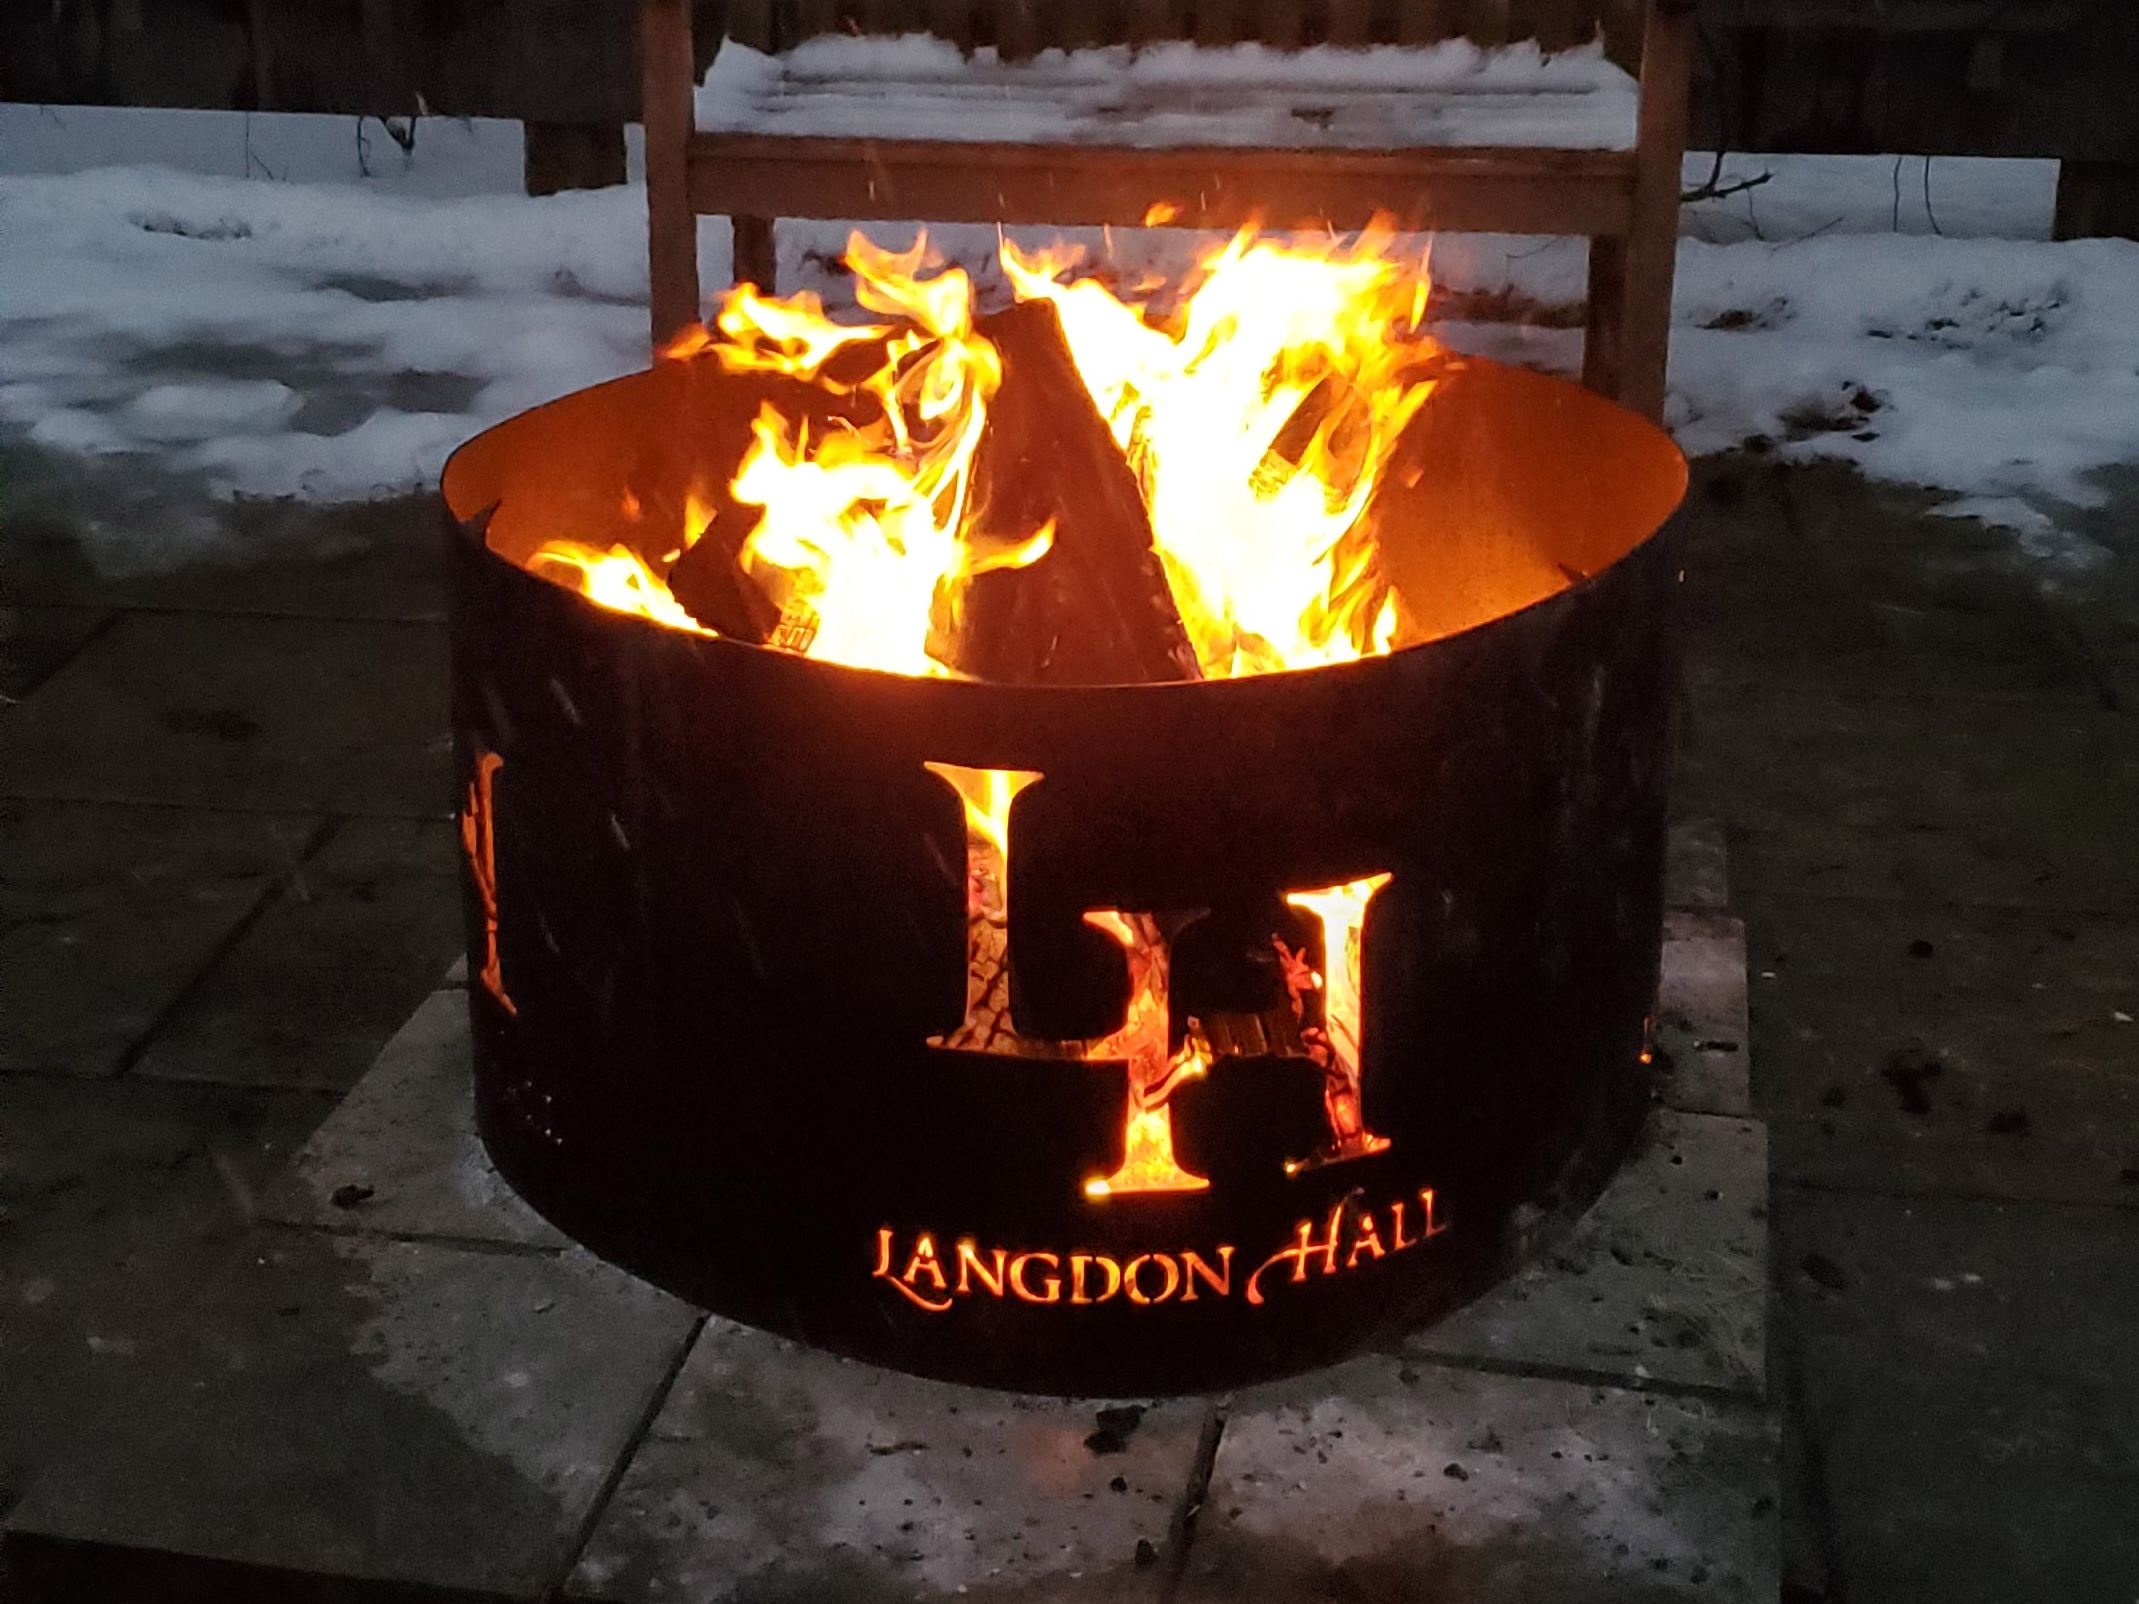 Fire Pits Are This Winter S Hottest, Are Propane Fire Pits Legal In Toronto